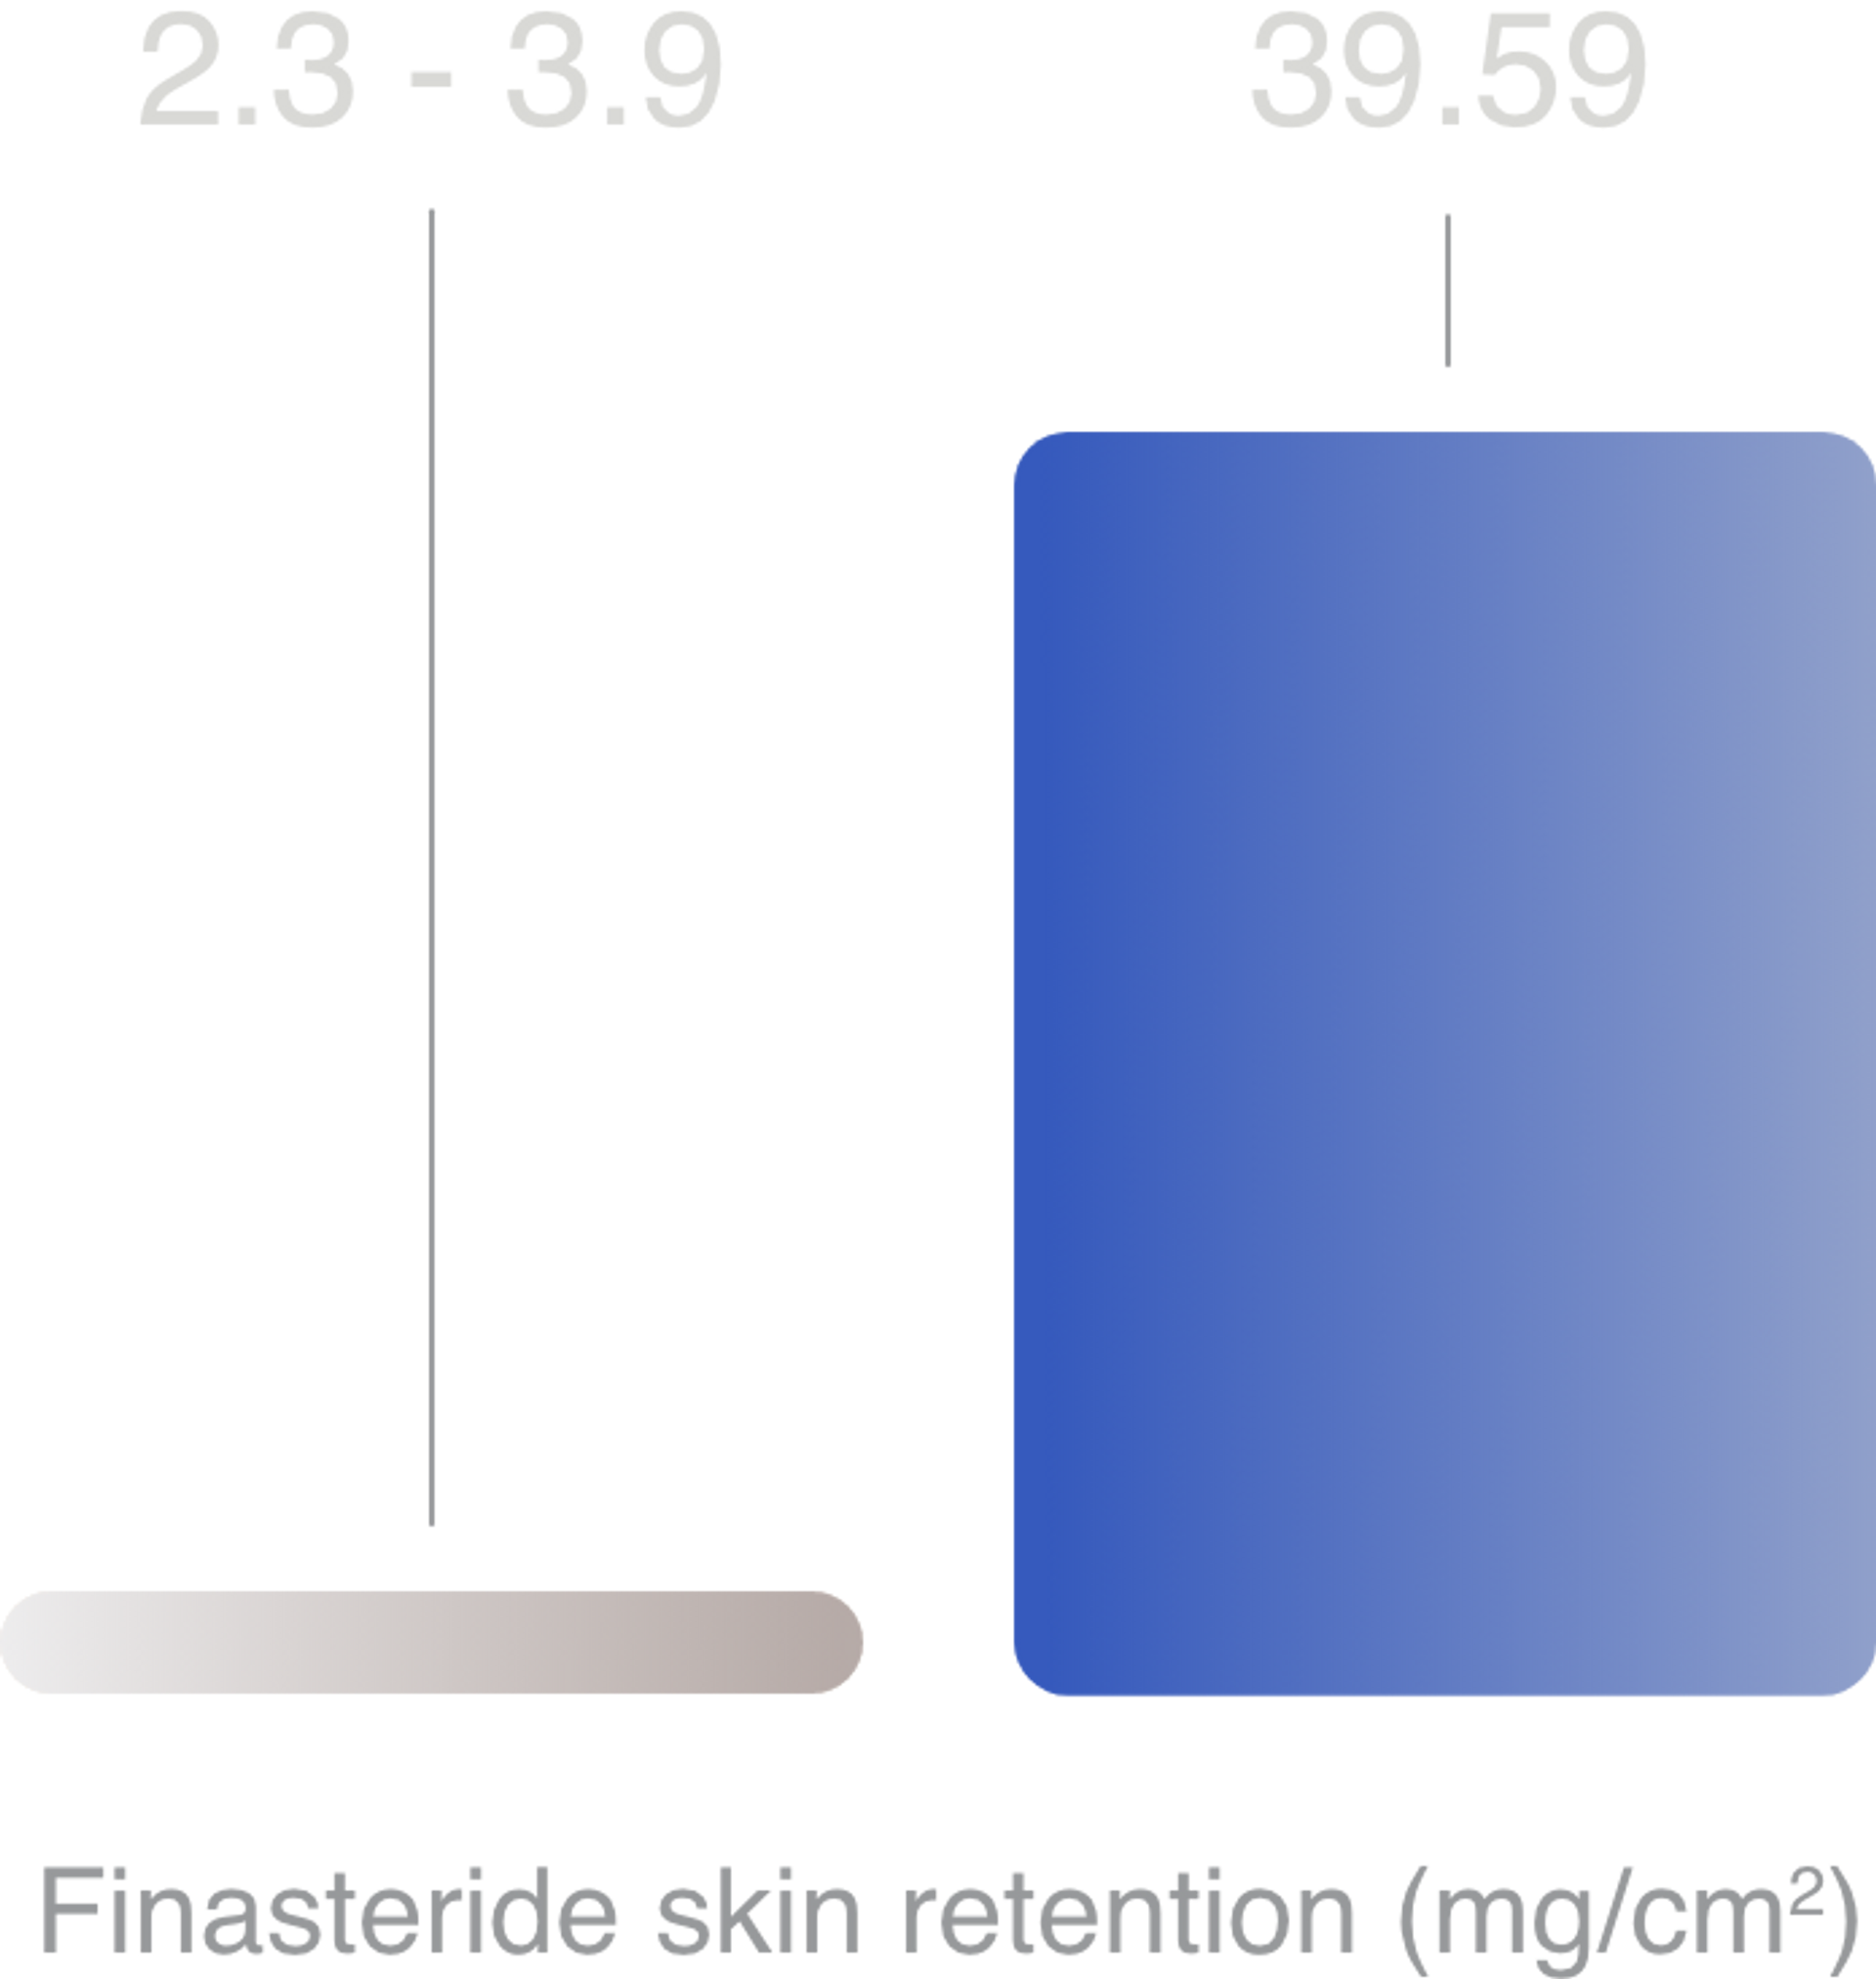 Finasteride skin retention of topical finasteride with SiloxysSystem Gel versus other formulations of topical finasteride